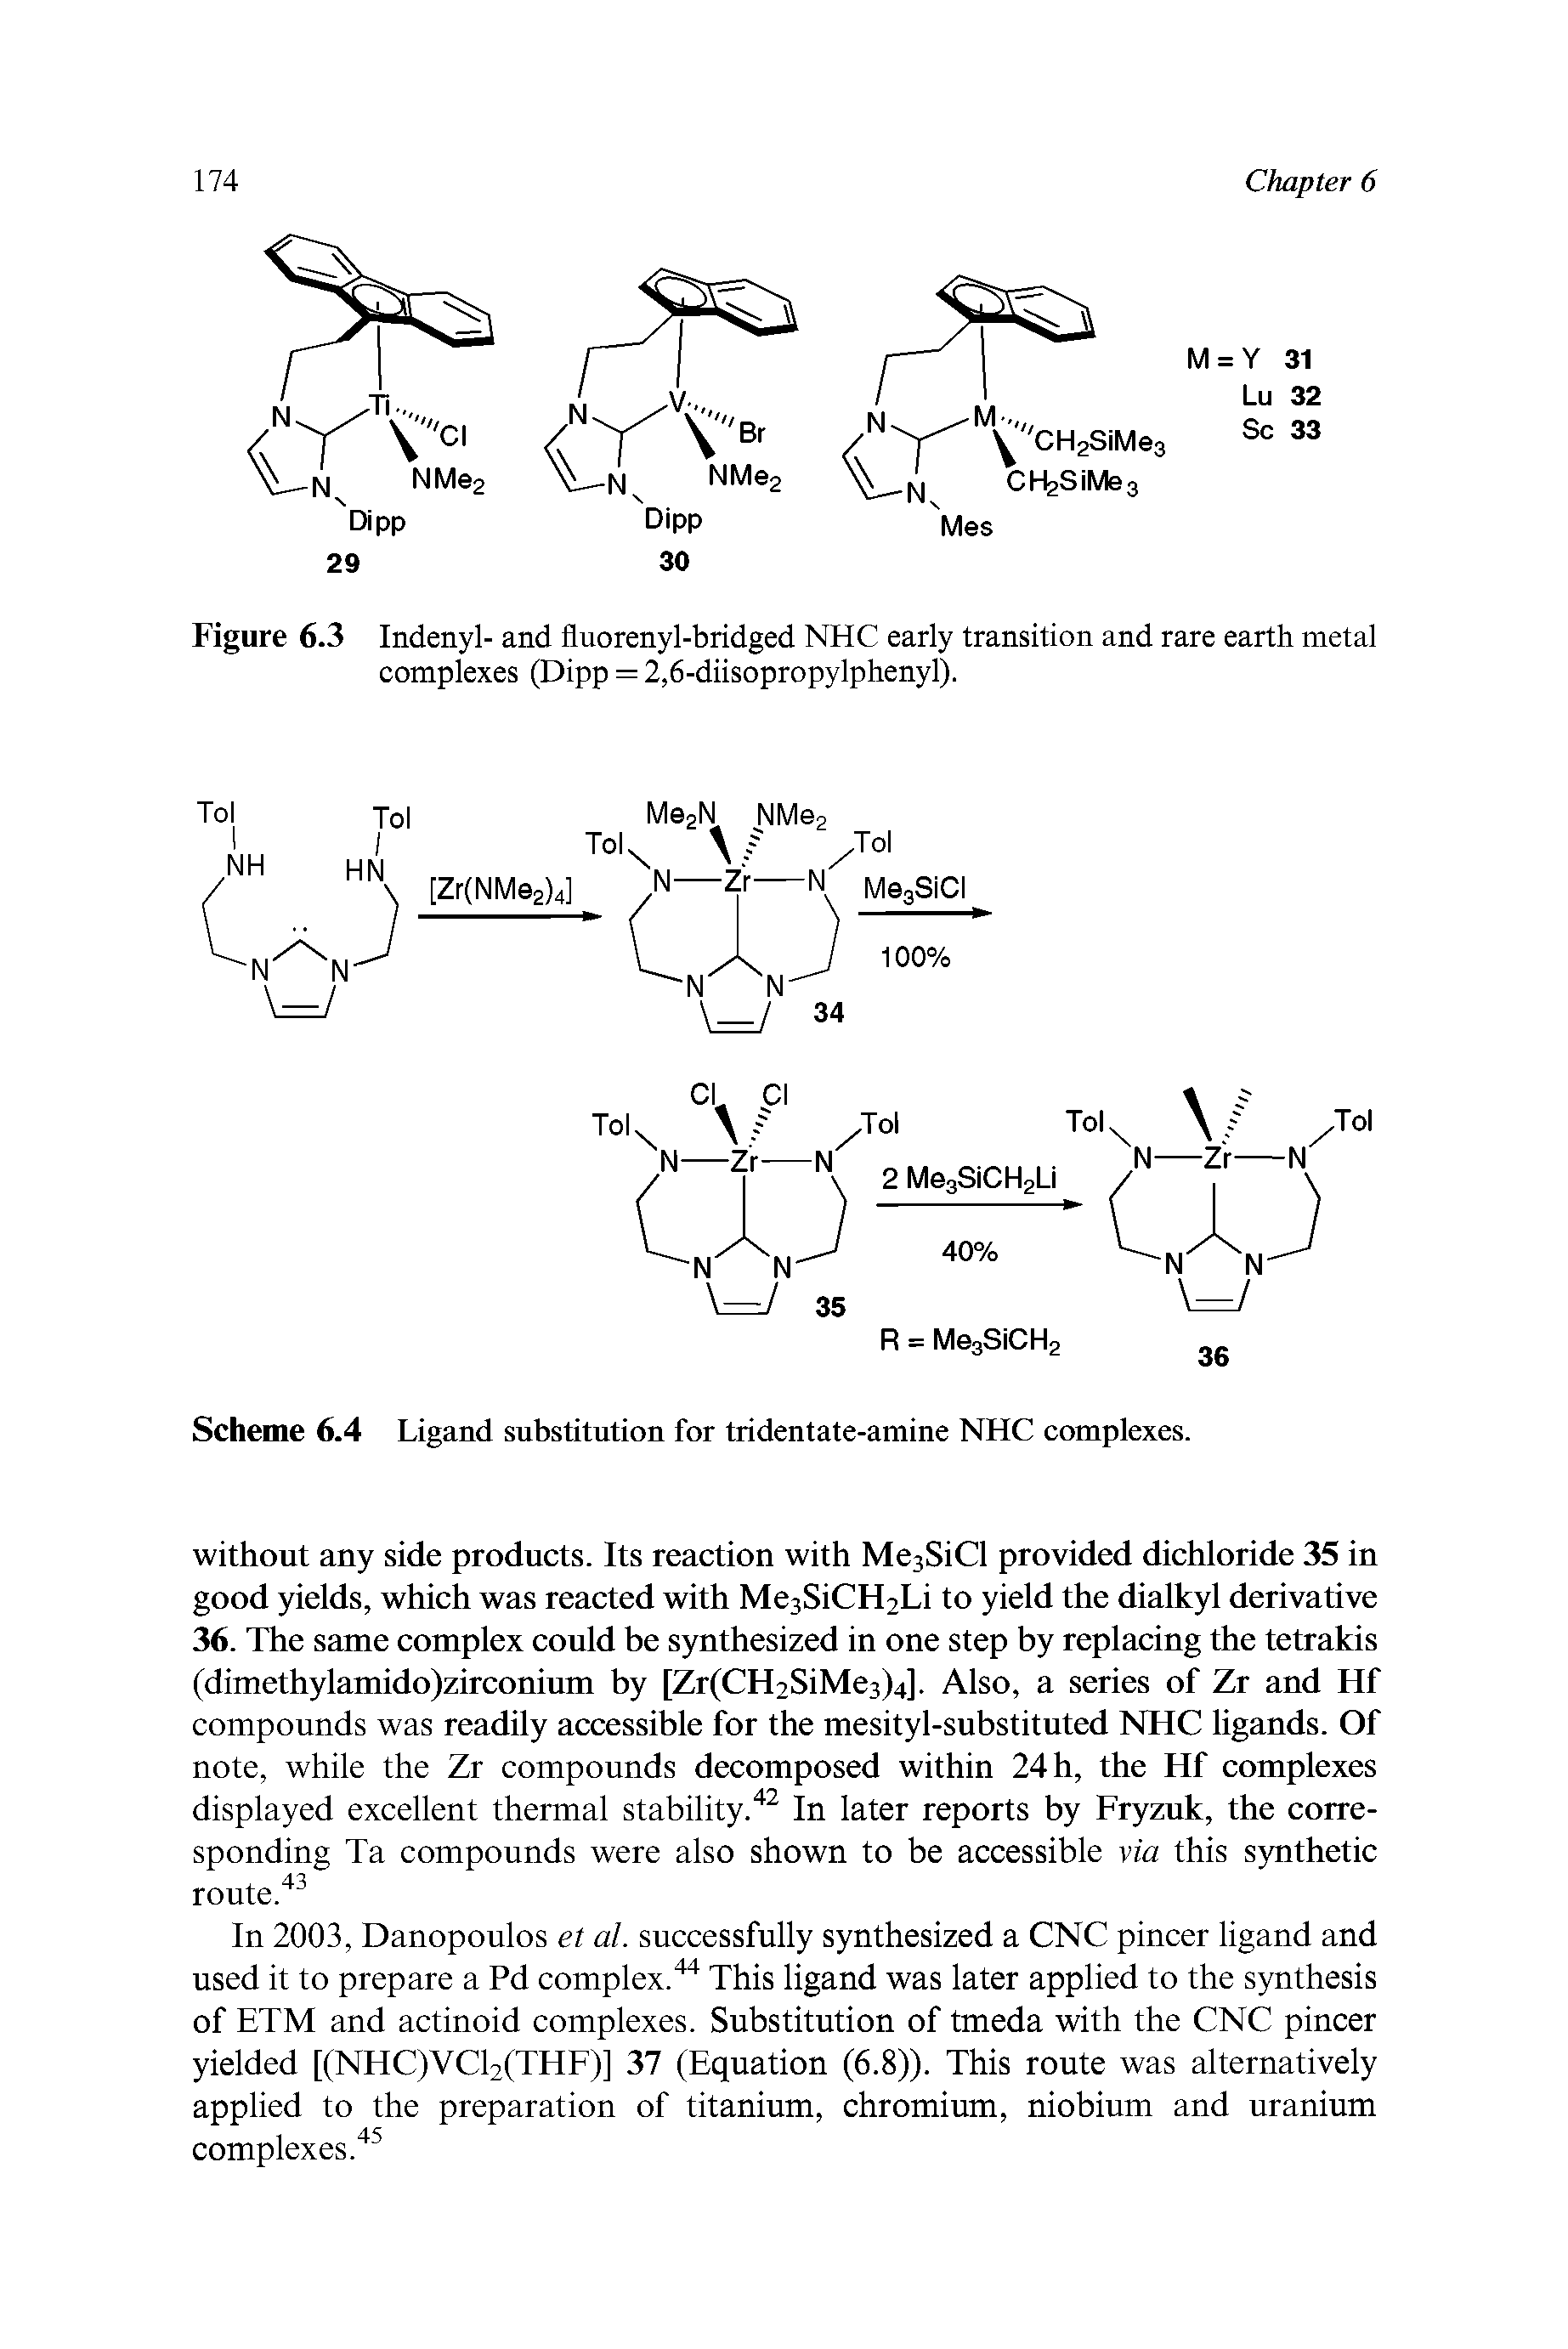 Figure 6.3 Indenyl- and fluorenyl-bridged NHC early transition and rare earth metal complexes (Dipp = 2,6-diisopropylphenyl).